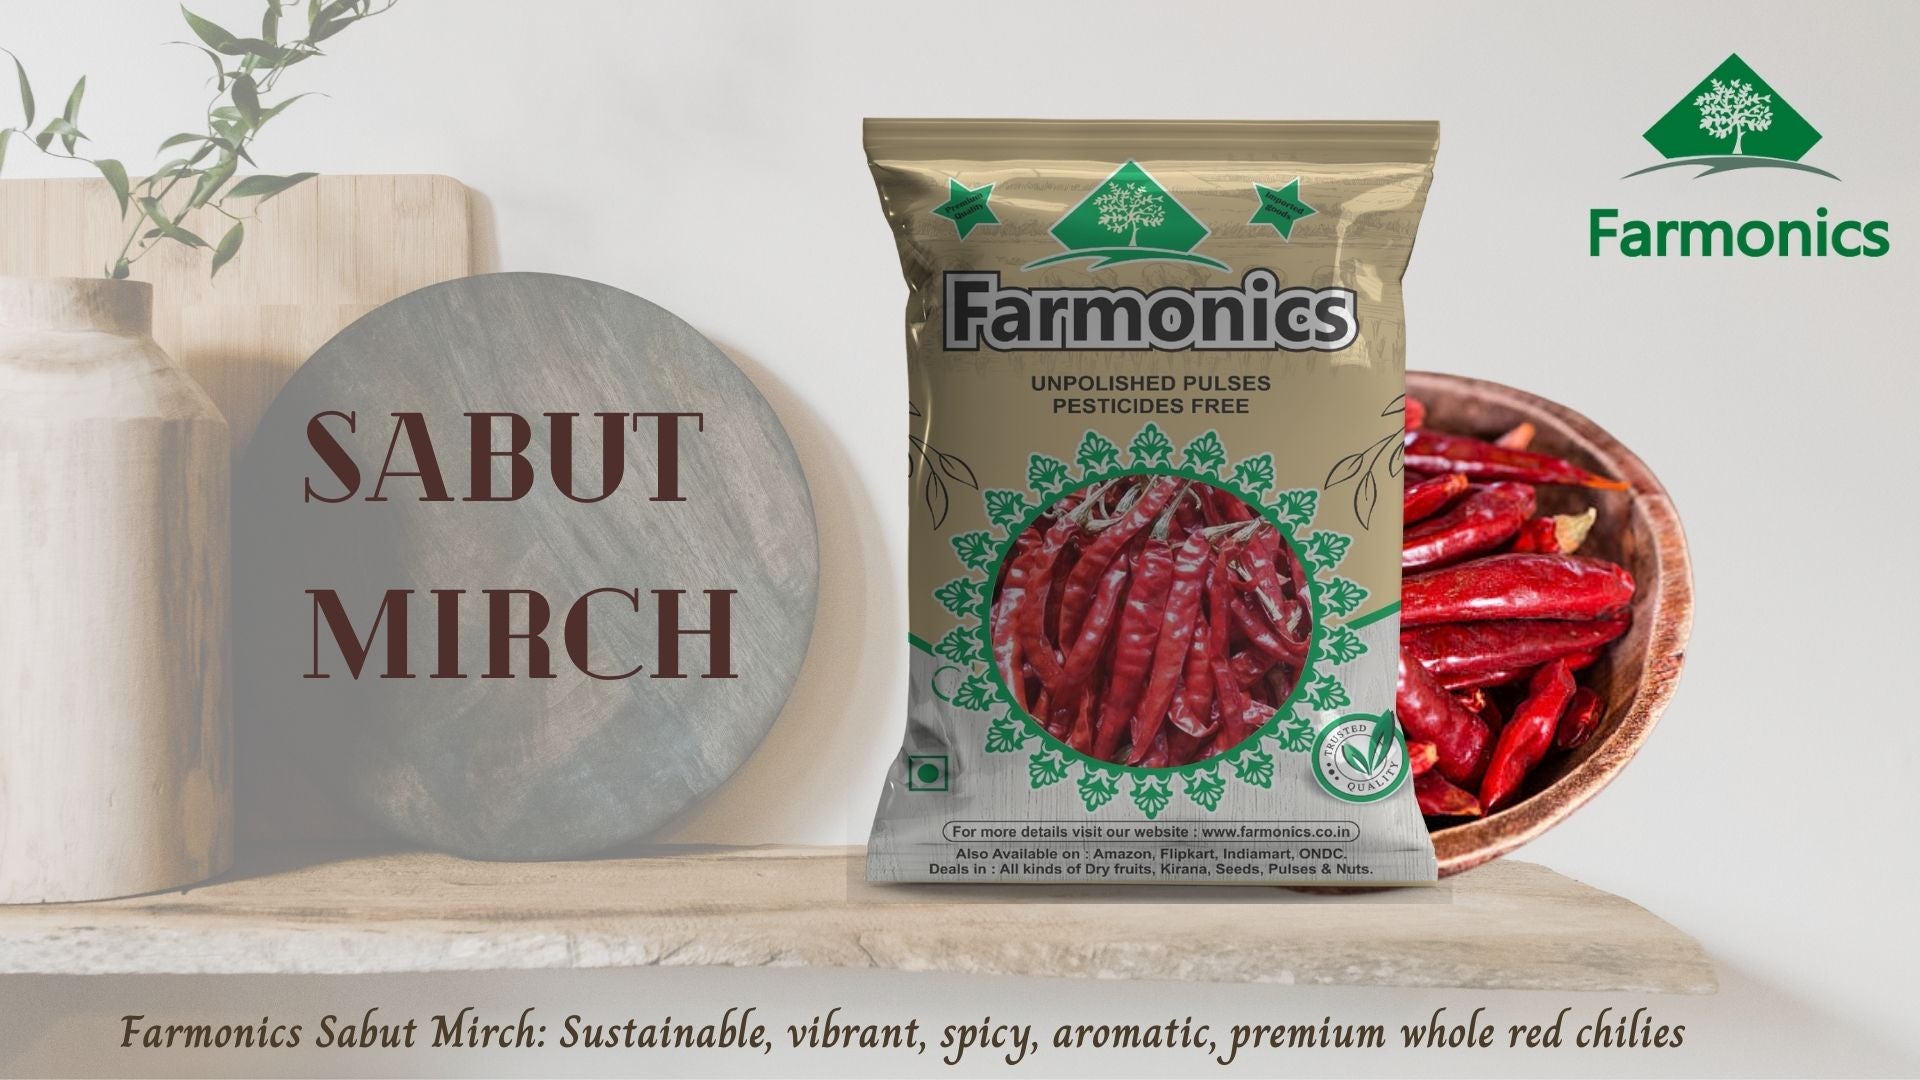 Get the best quality of sabut mirch from Farmonics